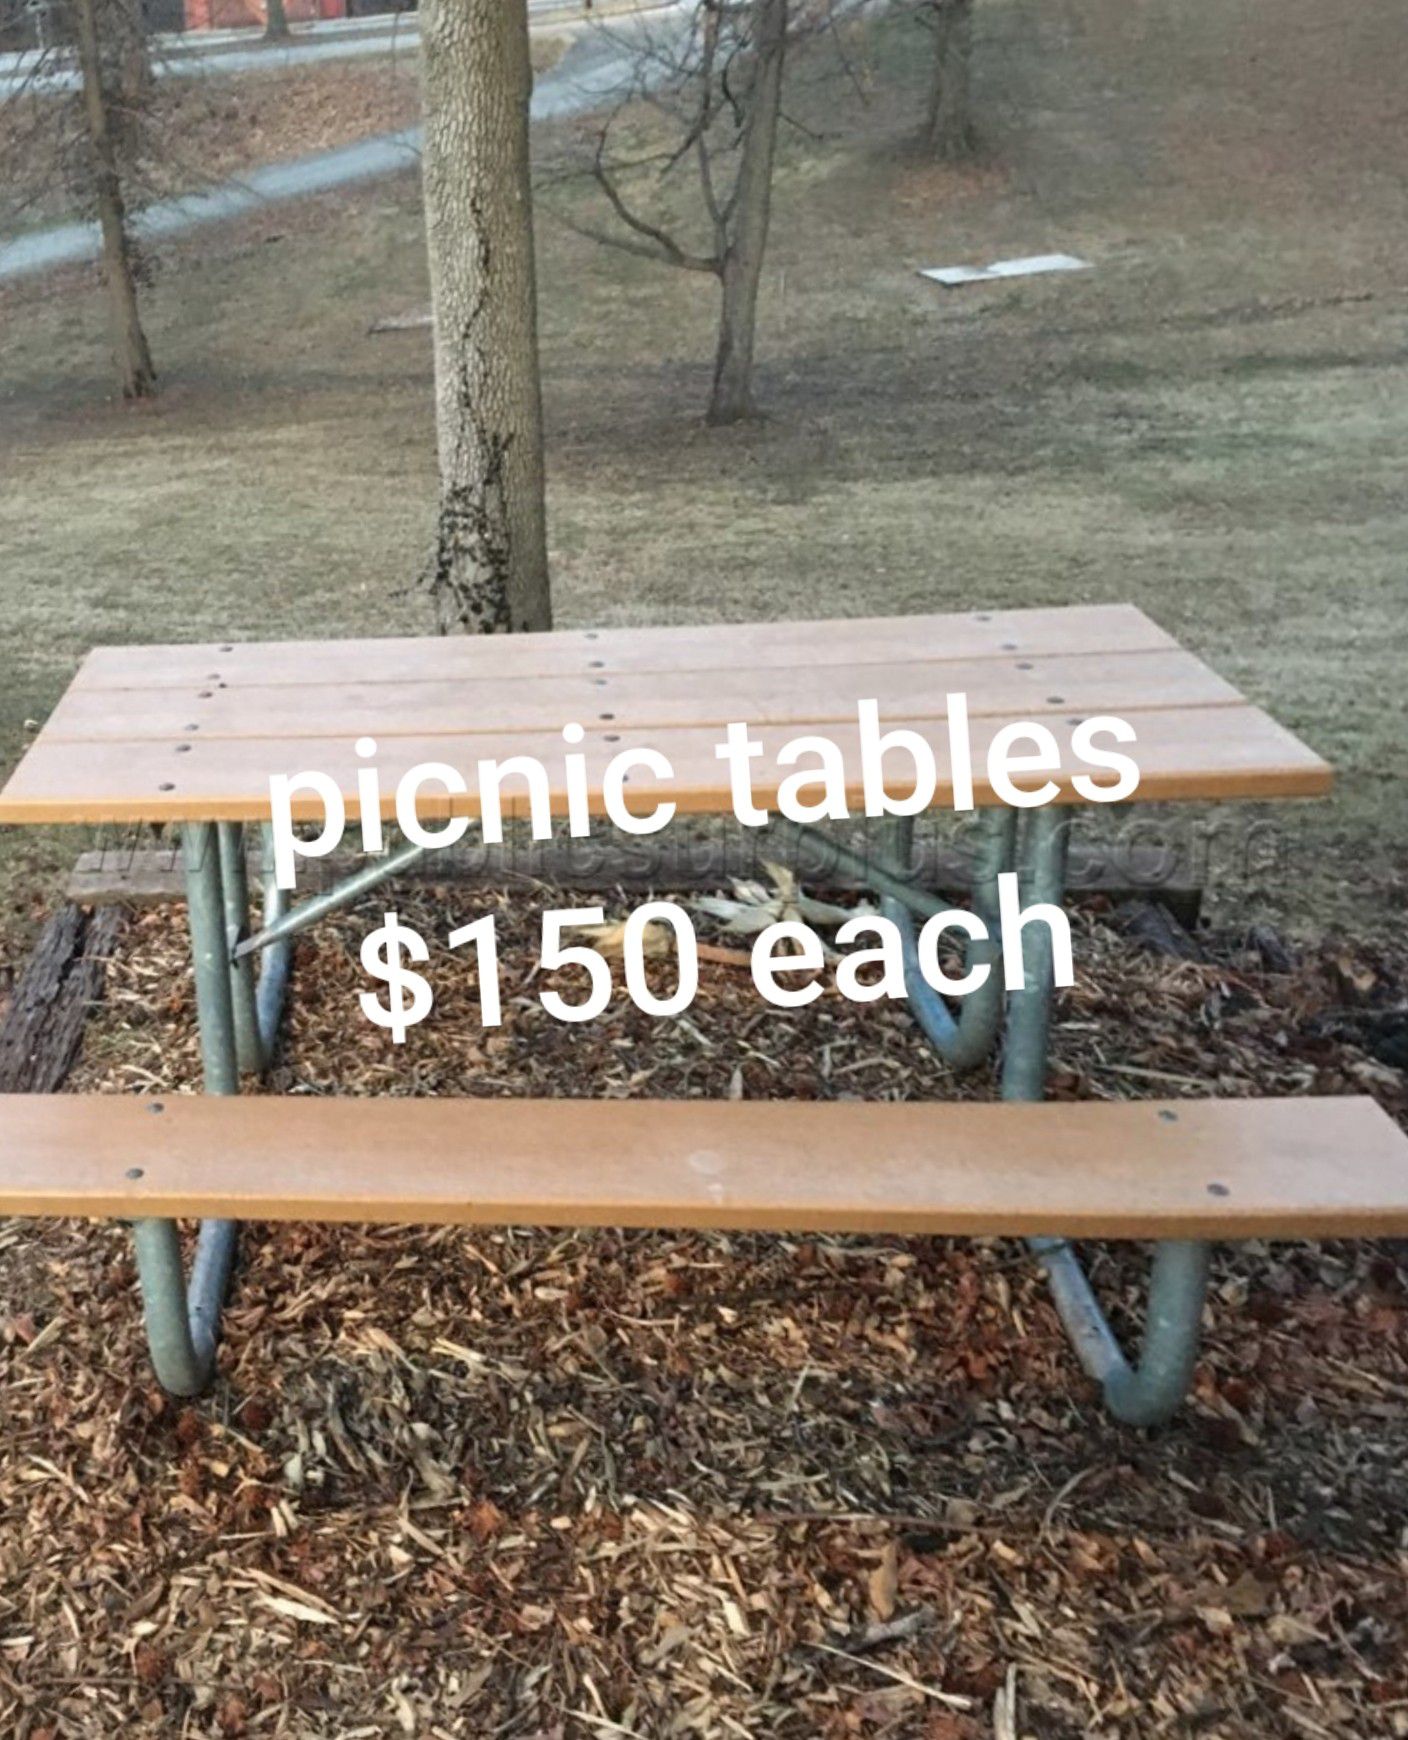 We have multiple tables